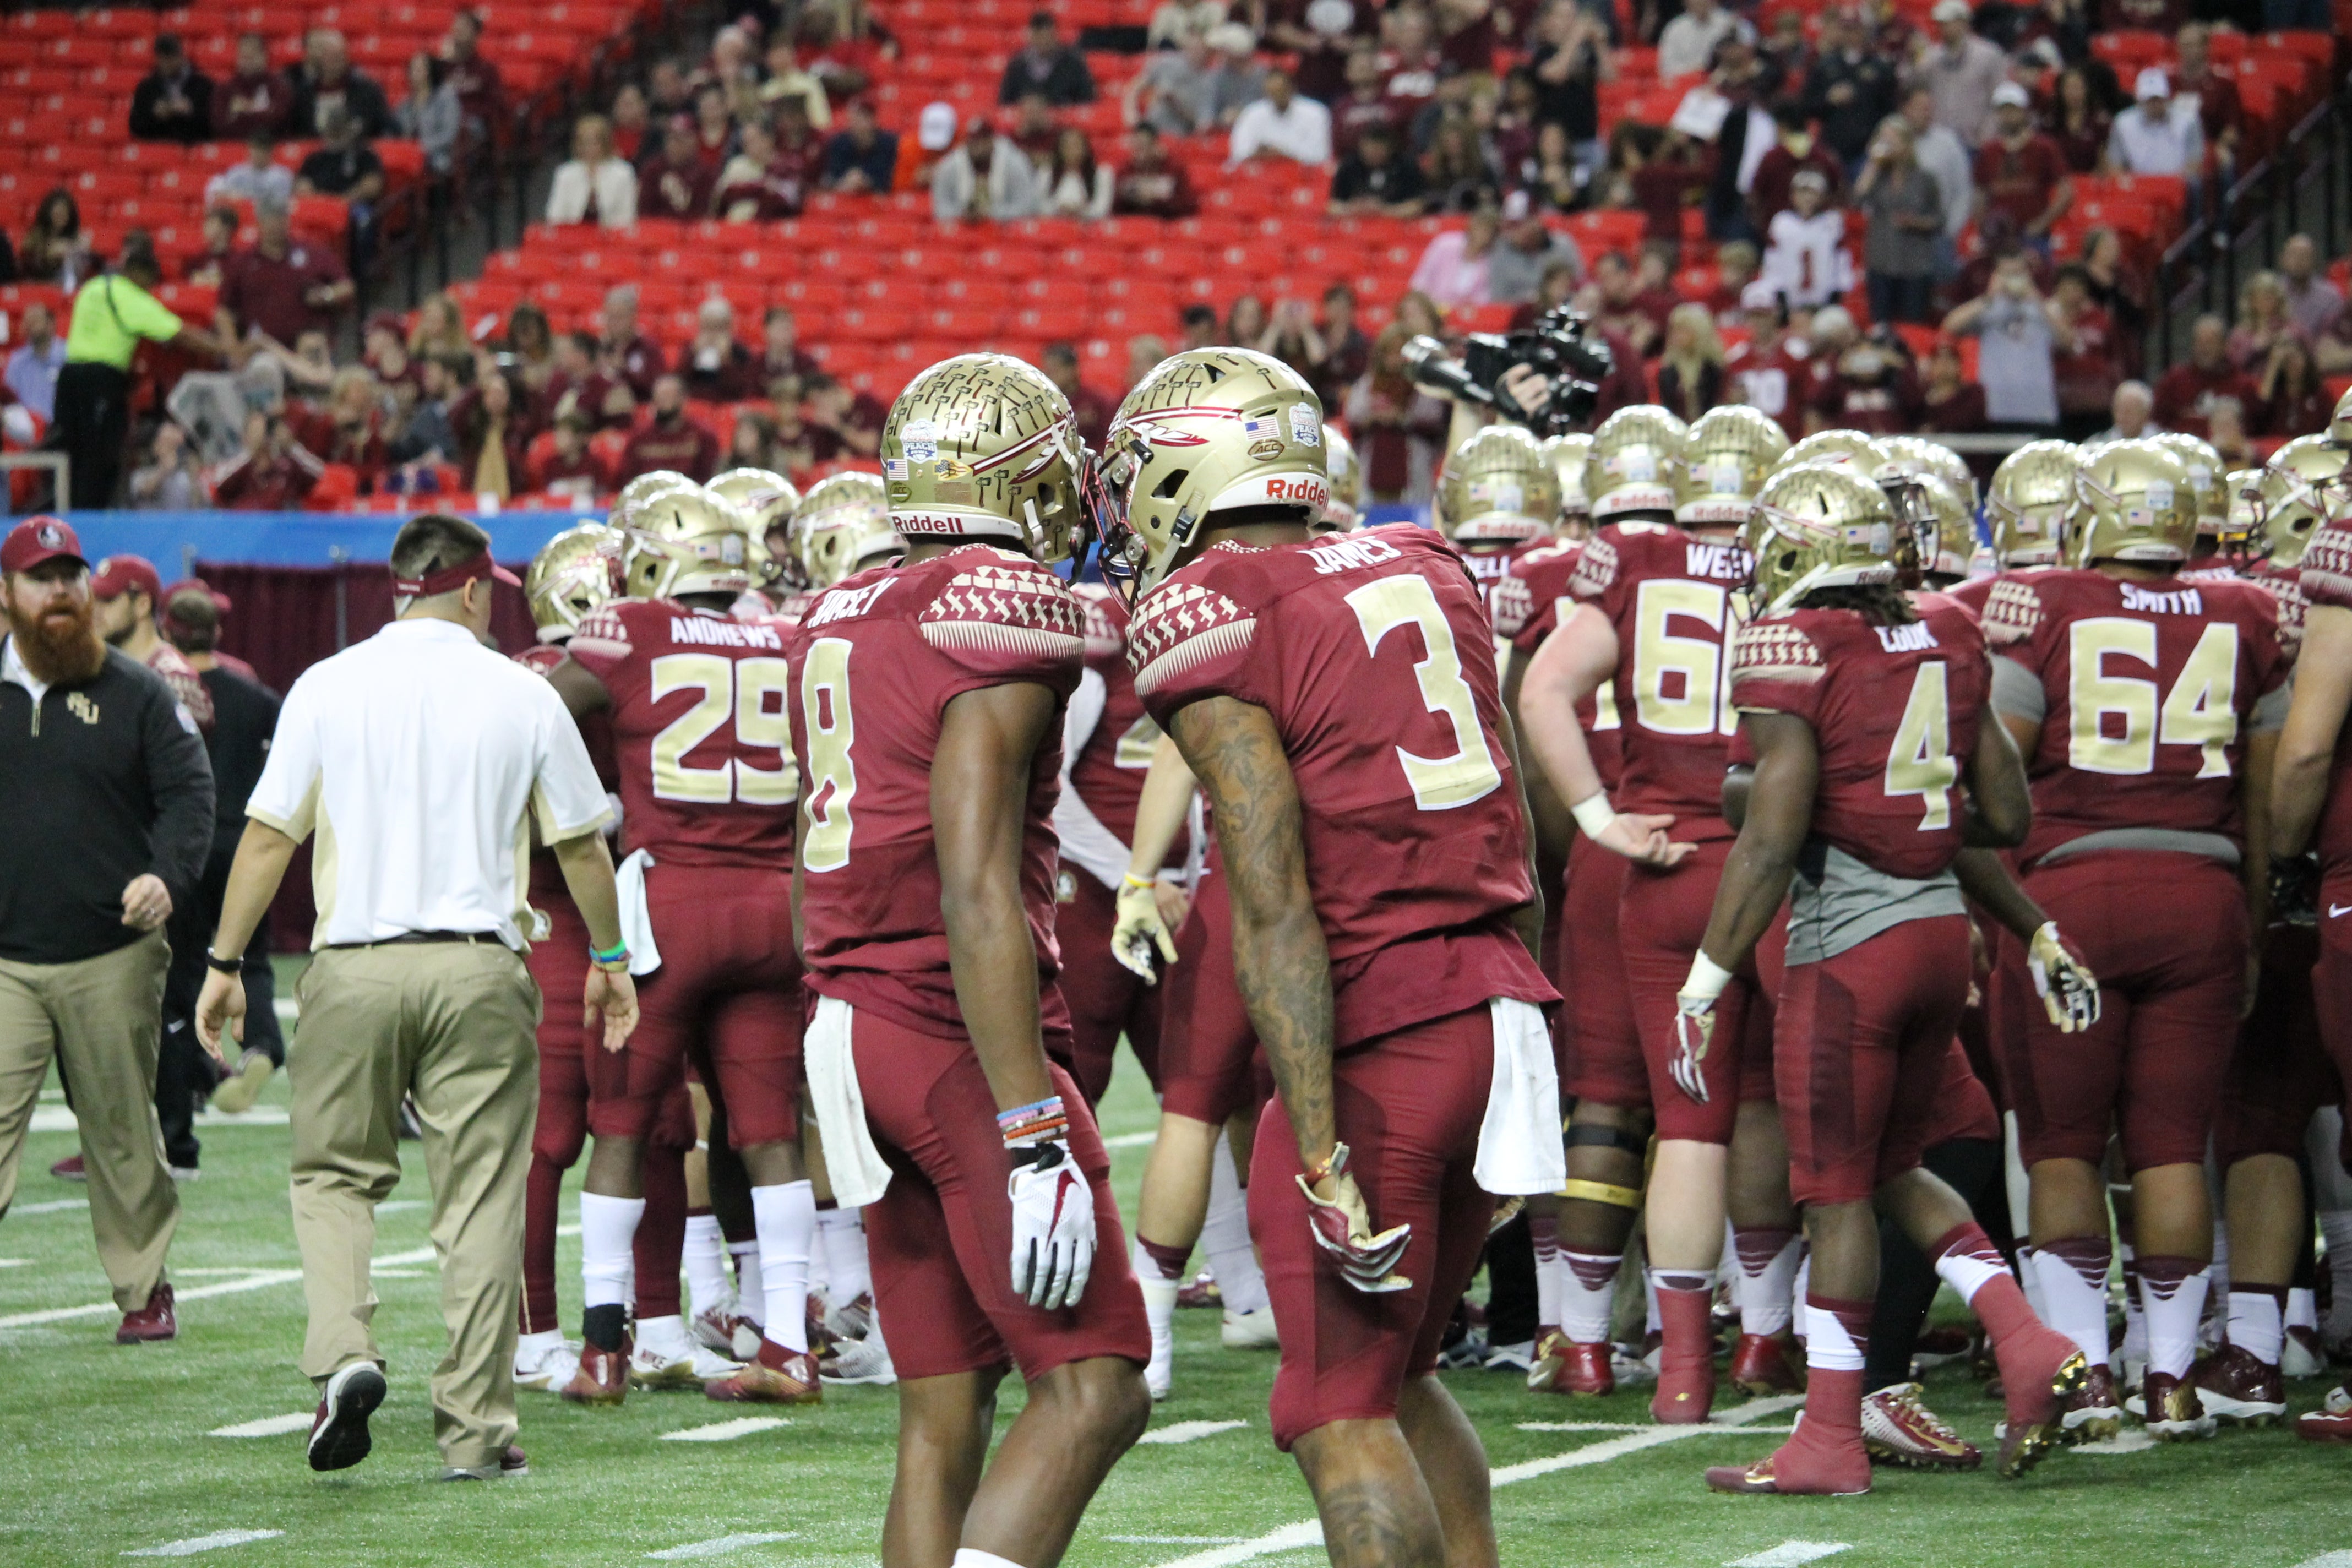 No. 11 Florida State's Ramsey honored to wear Ward's number